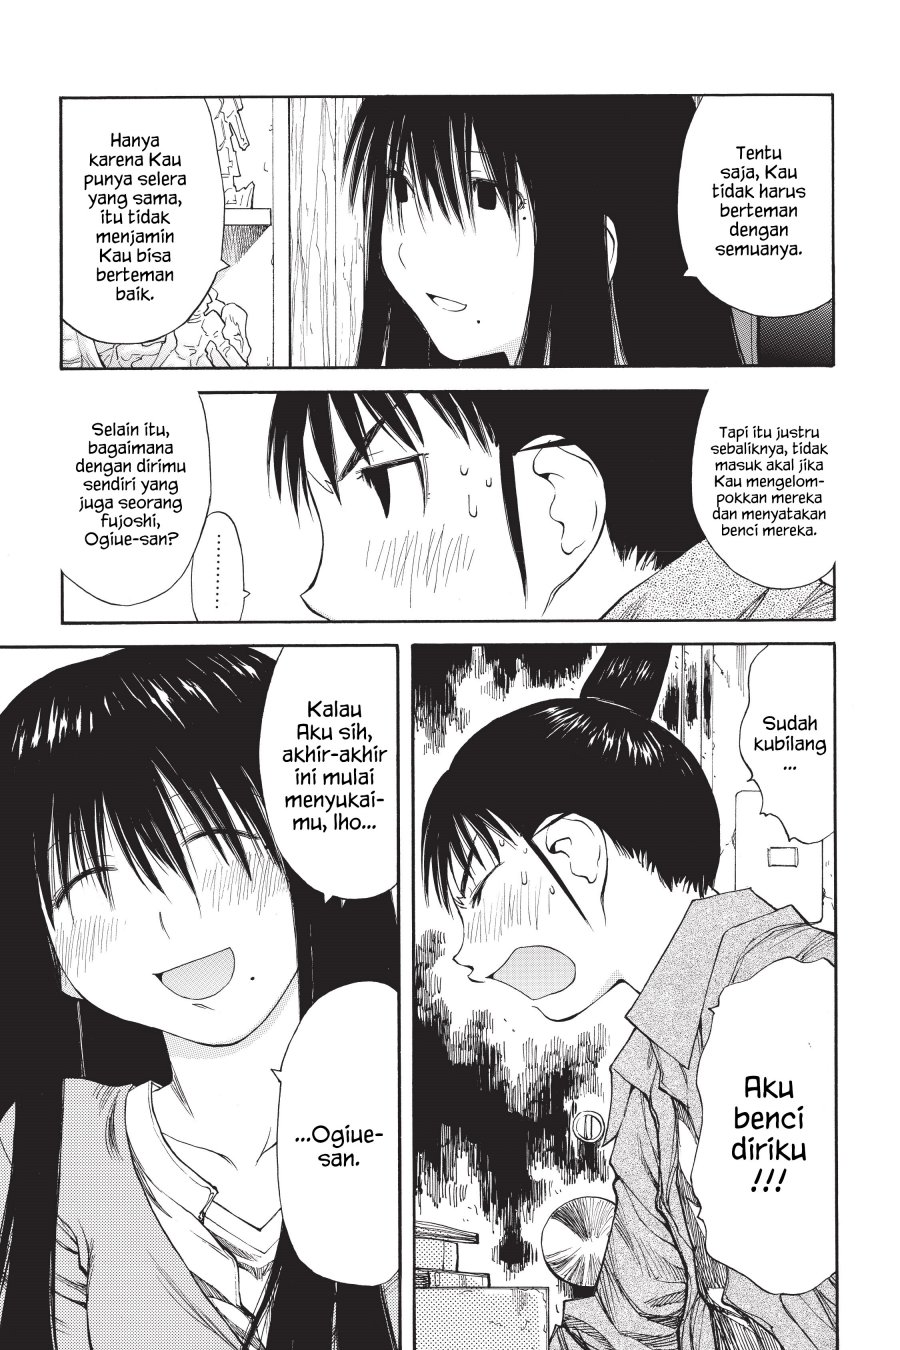 Genshiken – The Society for the Study of Modern Visual Culture Chapter 38 Image 14